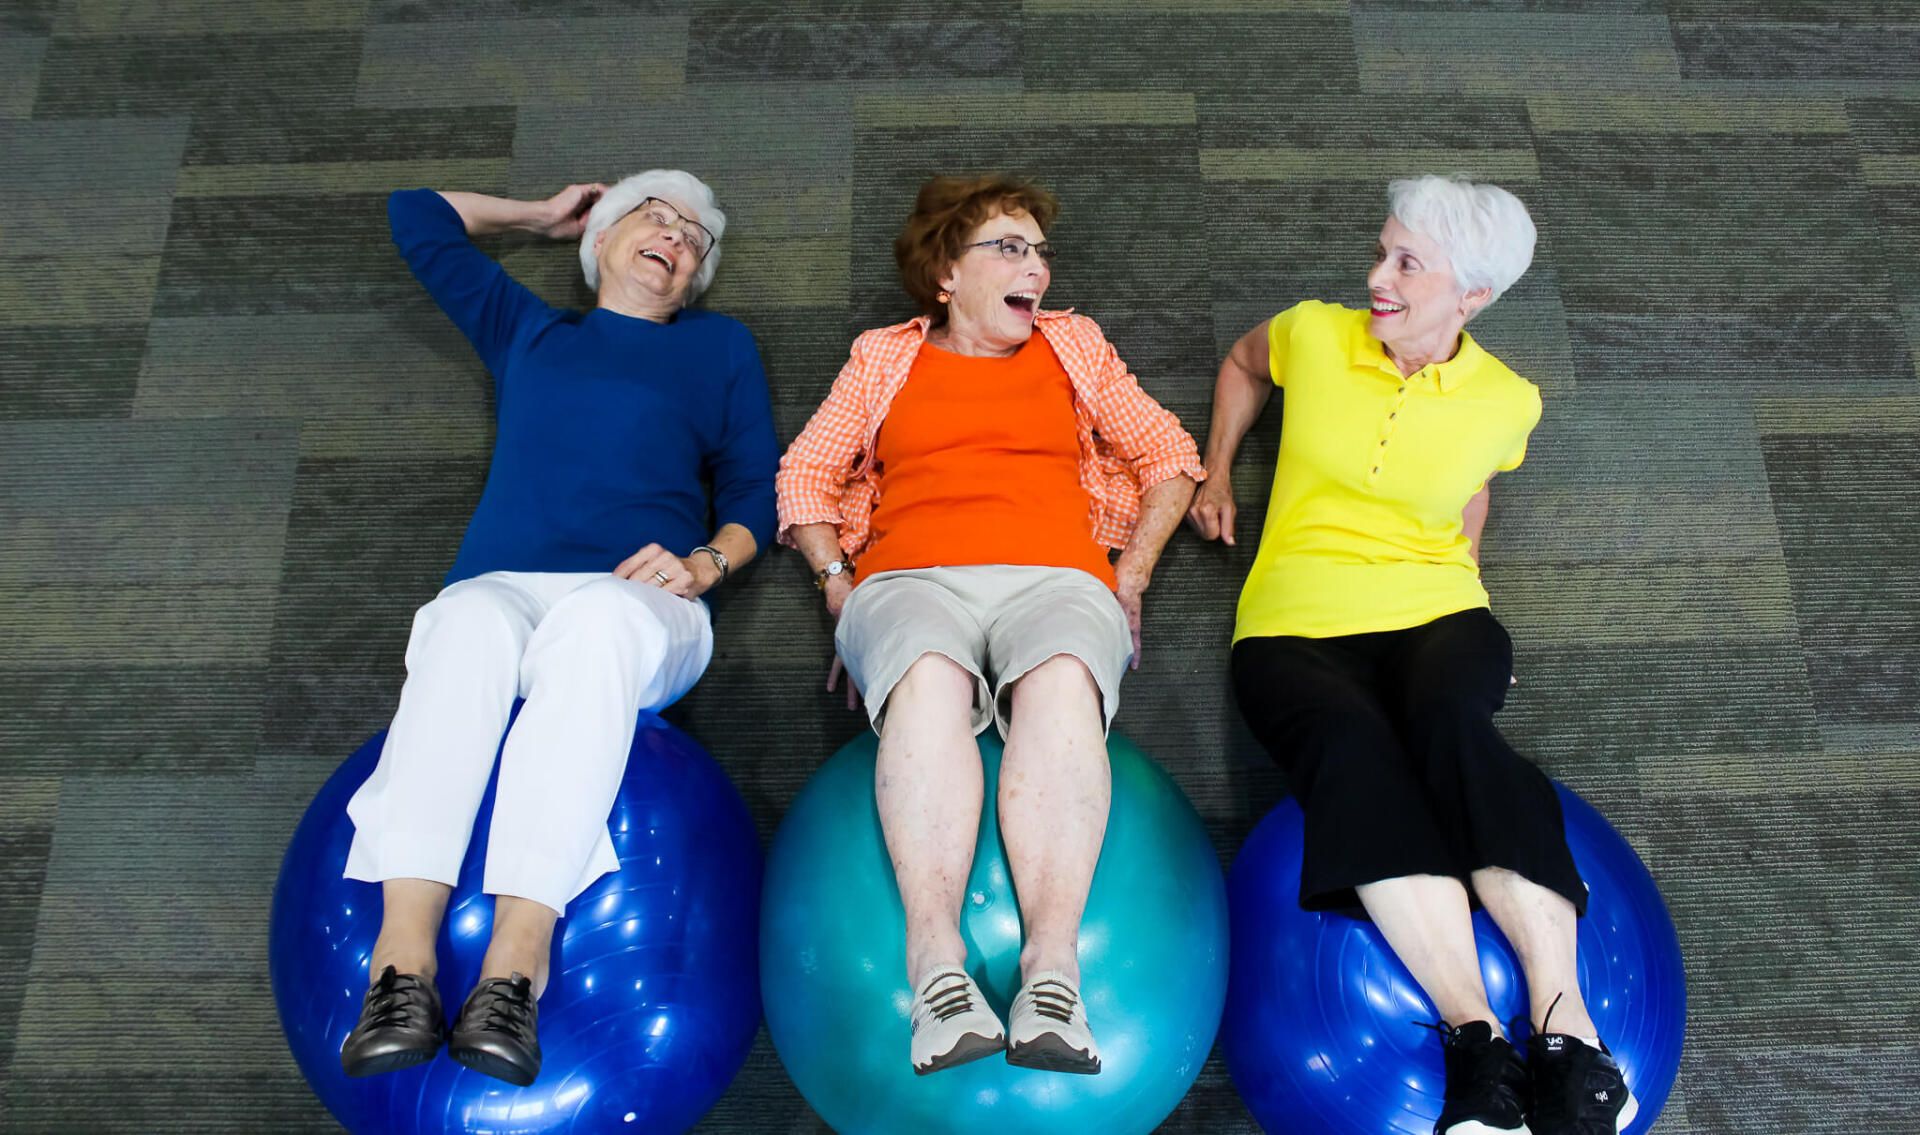 Retired ladies participating in the wellness program by exercising their legs with exercise balls